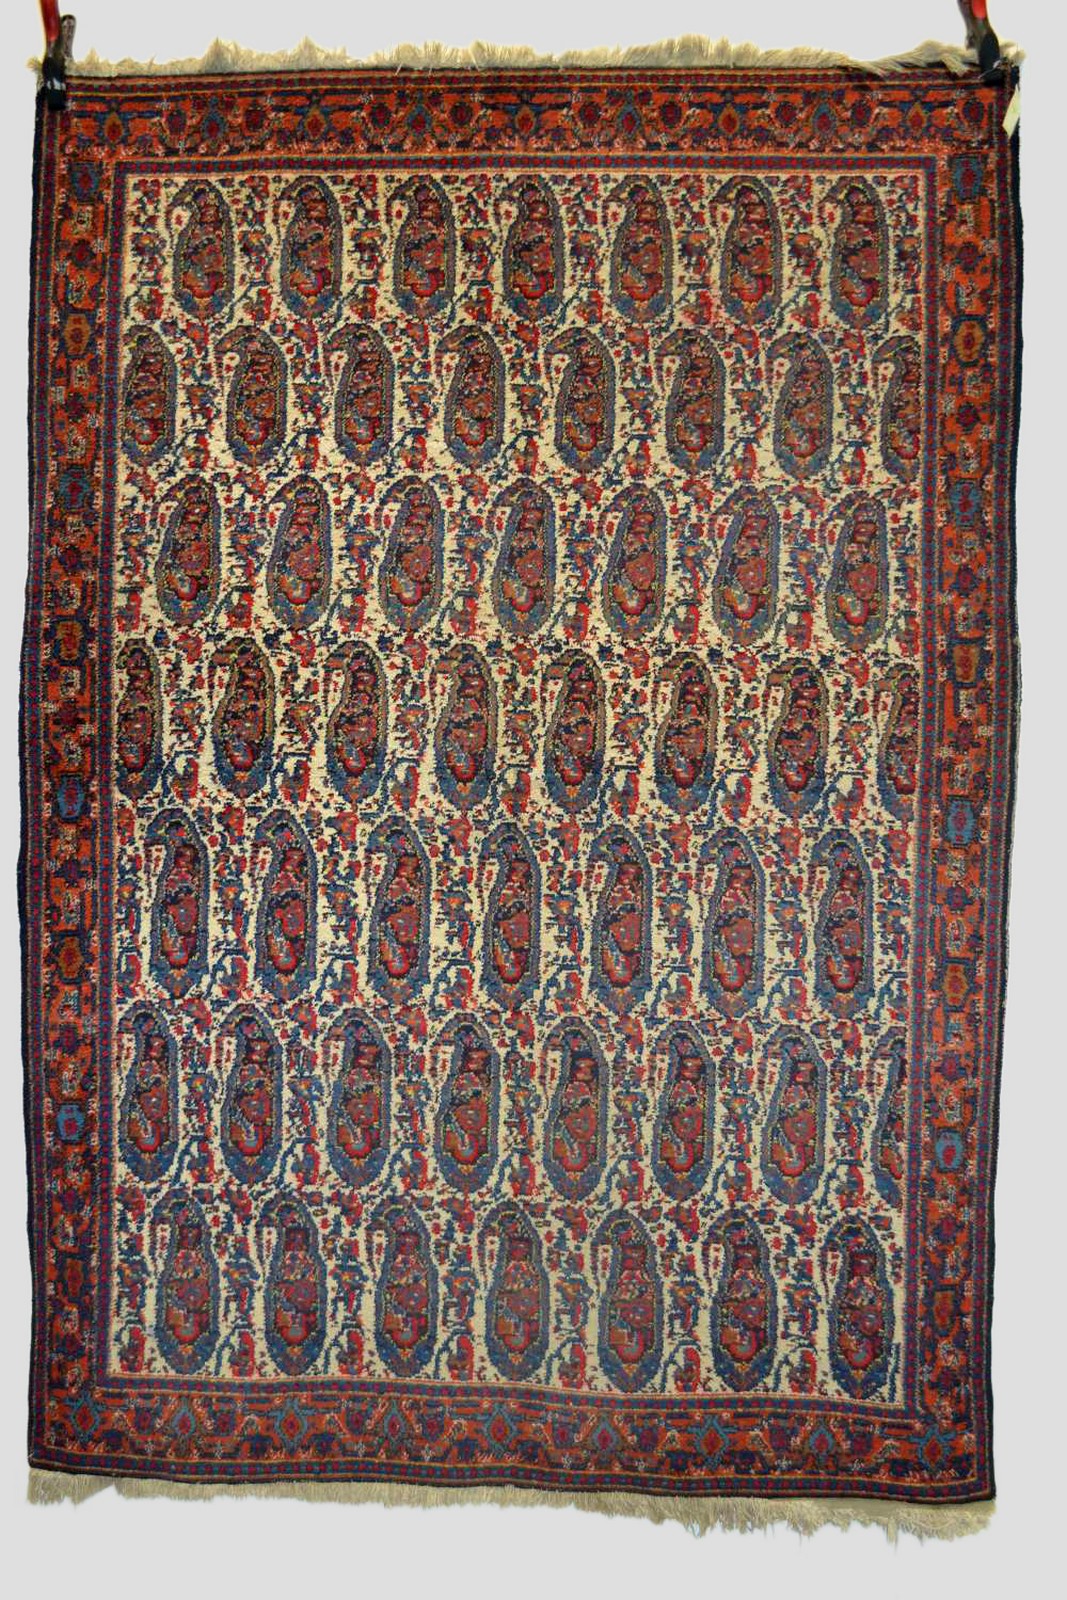 Senneh rug, Hamadan area, north west Persia, about 1930-50s, 6ft. 6in. x 4ft. 7in. 1.98m. x 1.40m.